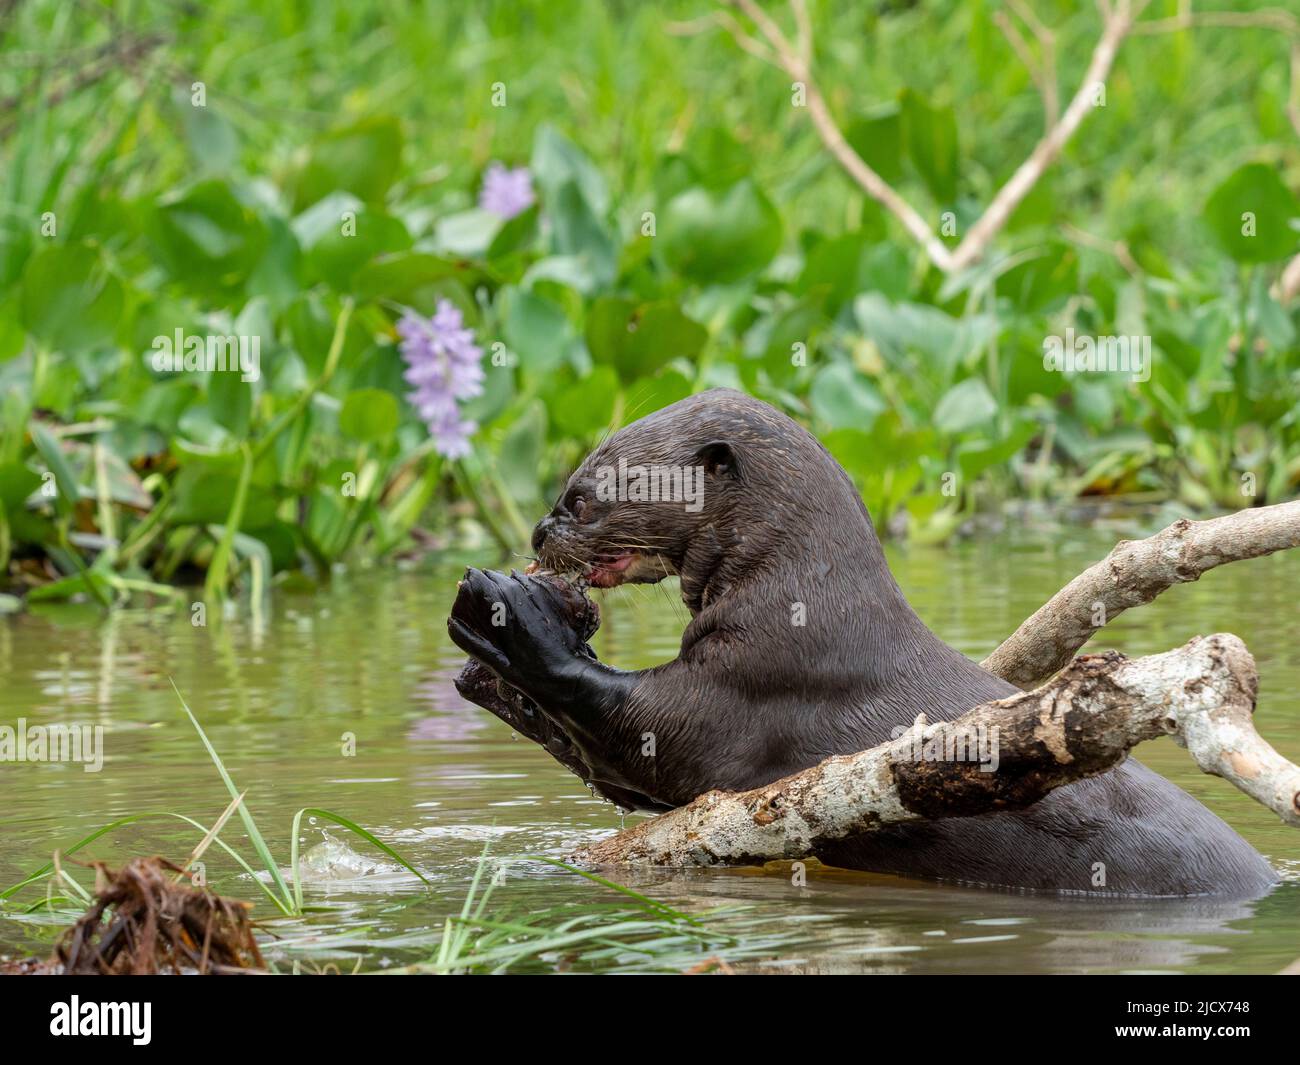 Adult giant river otter (Pteronura brasiliensis), eating a fish on the Rio Tres Irmao, Mato Grosso, Pantanal, Brazil, South America Stock Photo